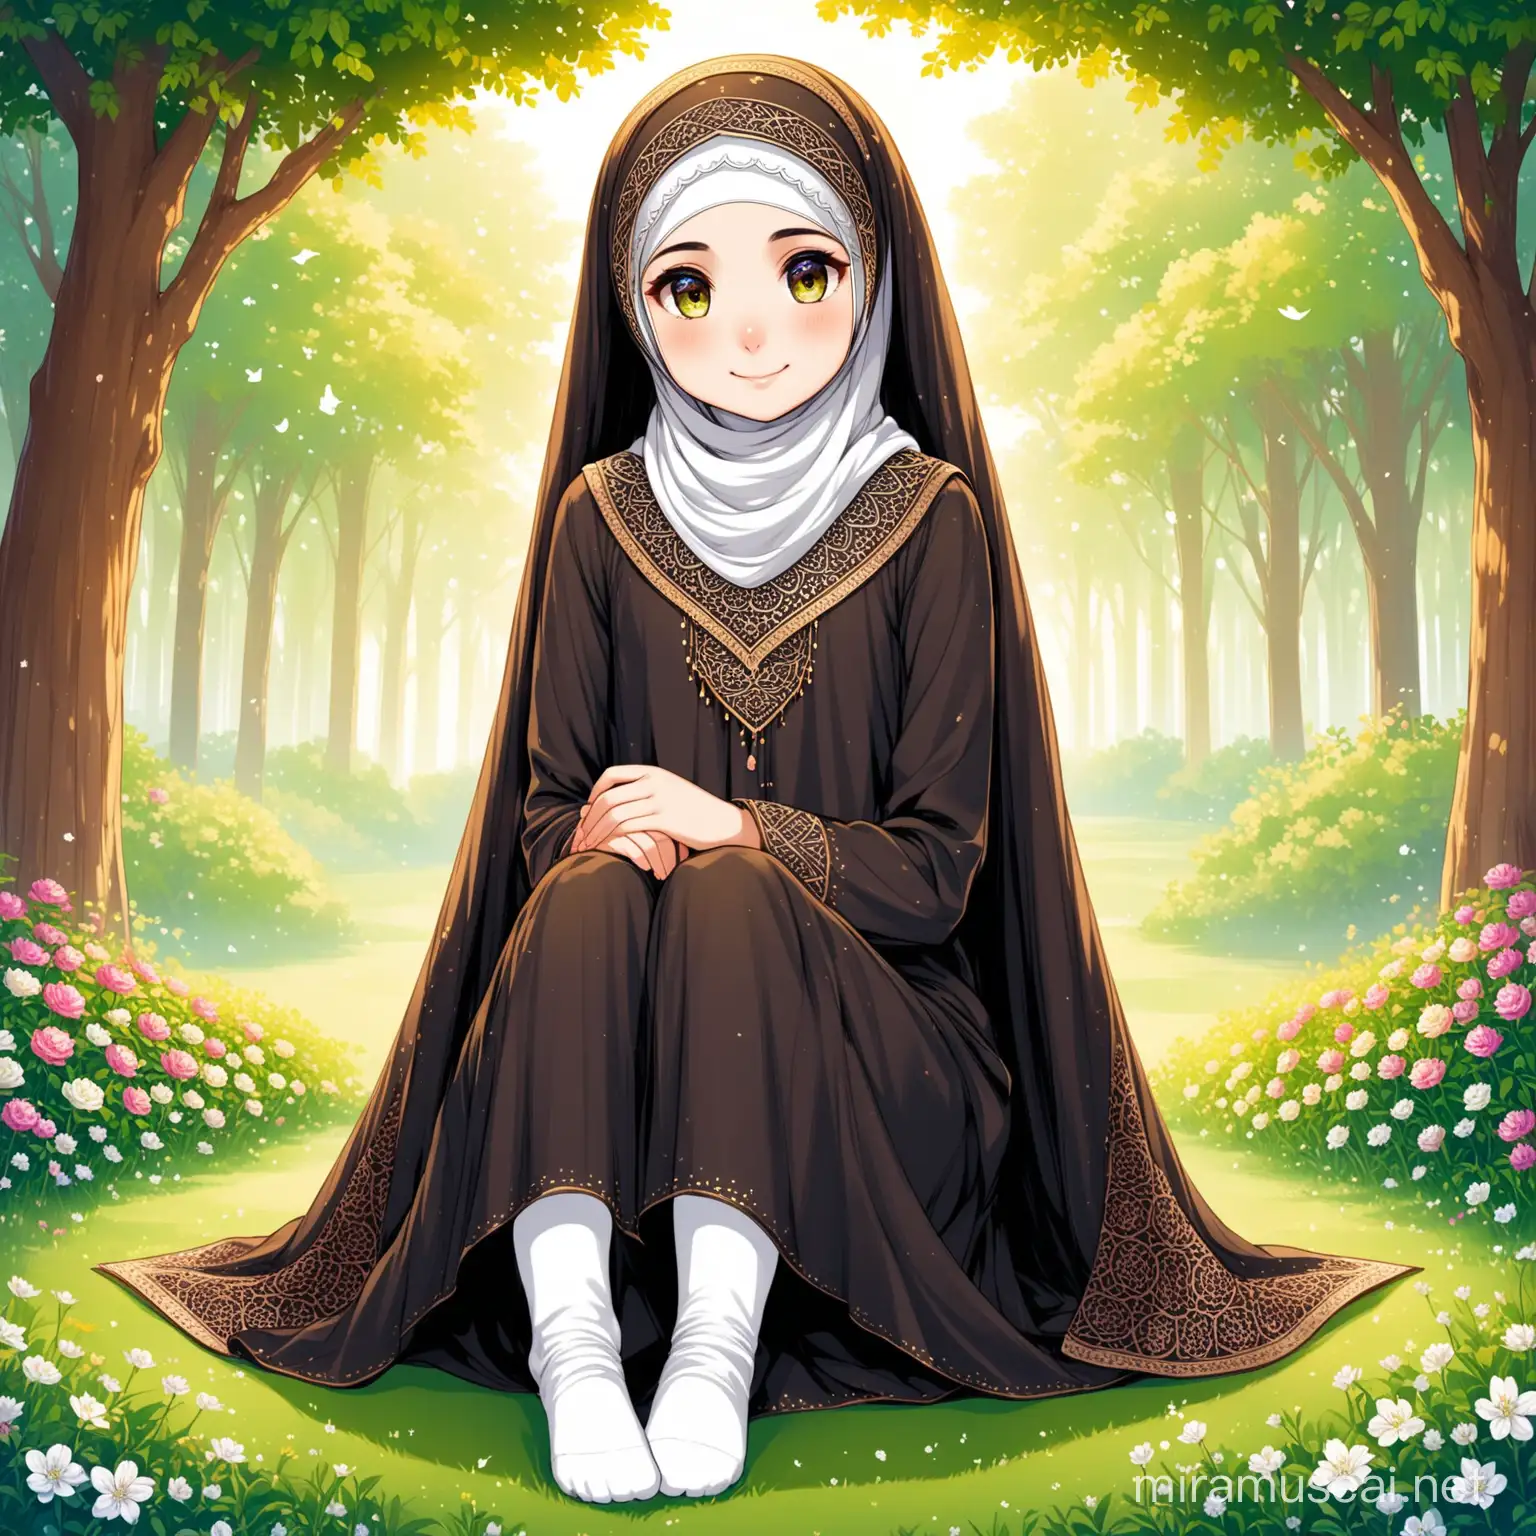 Character 8 years old Persian girl(full height, Muslim, with emphasis no hair out of veil(Hijab), smaller eyes, bigger nose, white skin, cute, smiling, wearing socks, clothes full of Persian designs) named Fatemeh.
Mother of Fatemeh's name is Roqayeh, Roqayeh is wearing modest clothes, veil.
Fatemeh is sitting with her mother Roqayeh politely.

Atmosphere forest, grass flowers, etc...